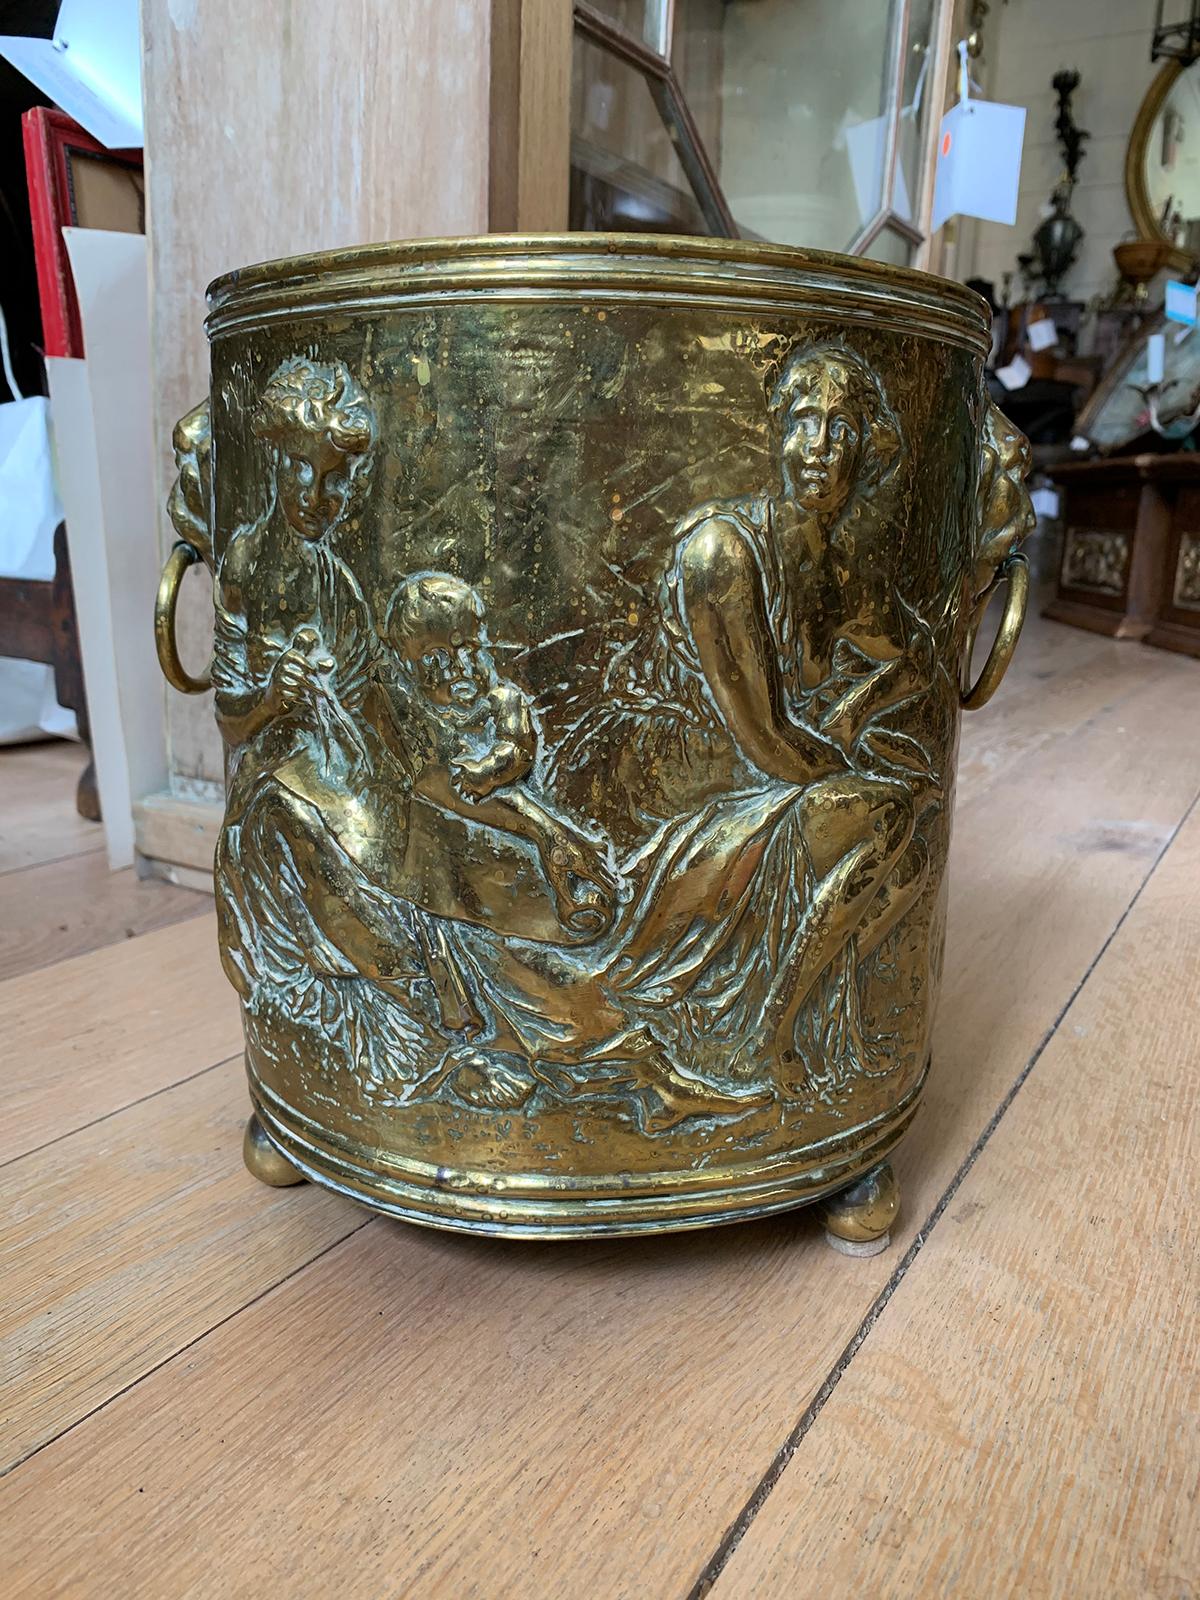 19th century continental brass cachepot with lion pulls.